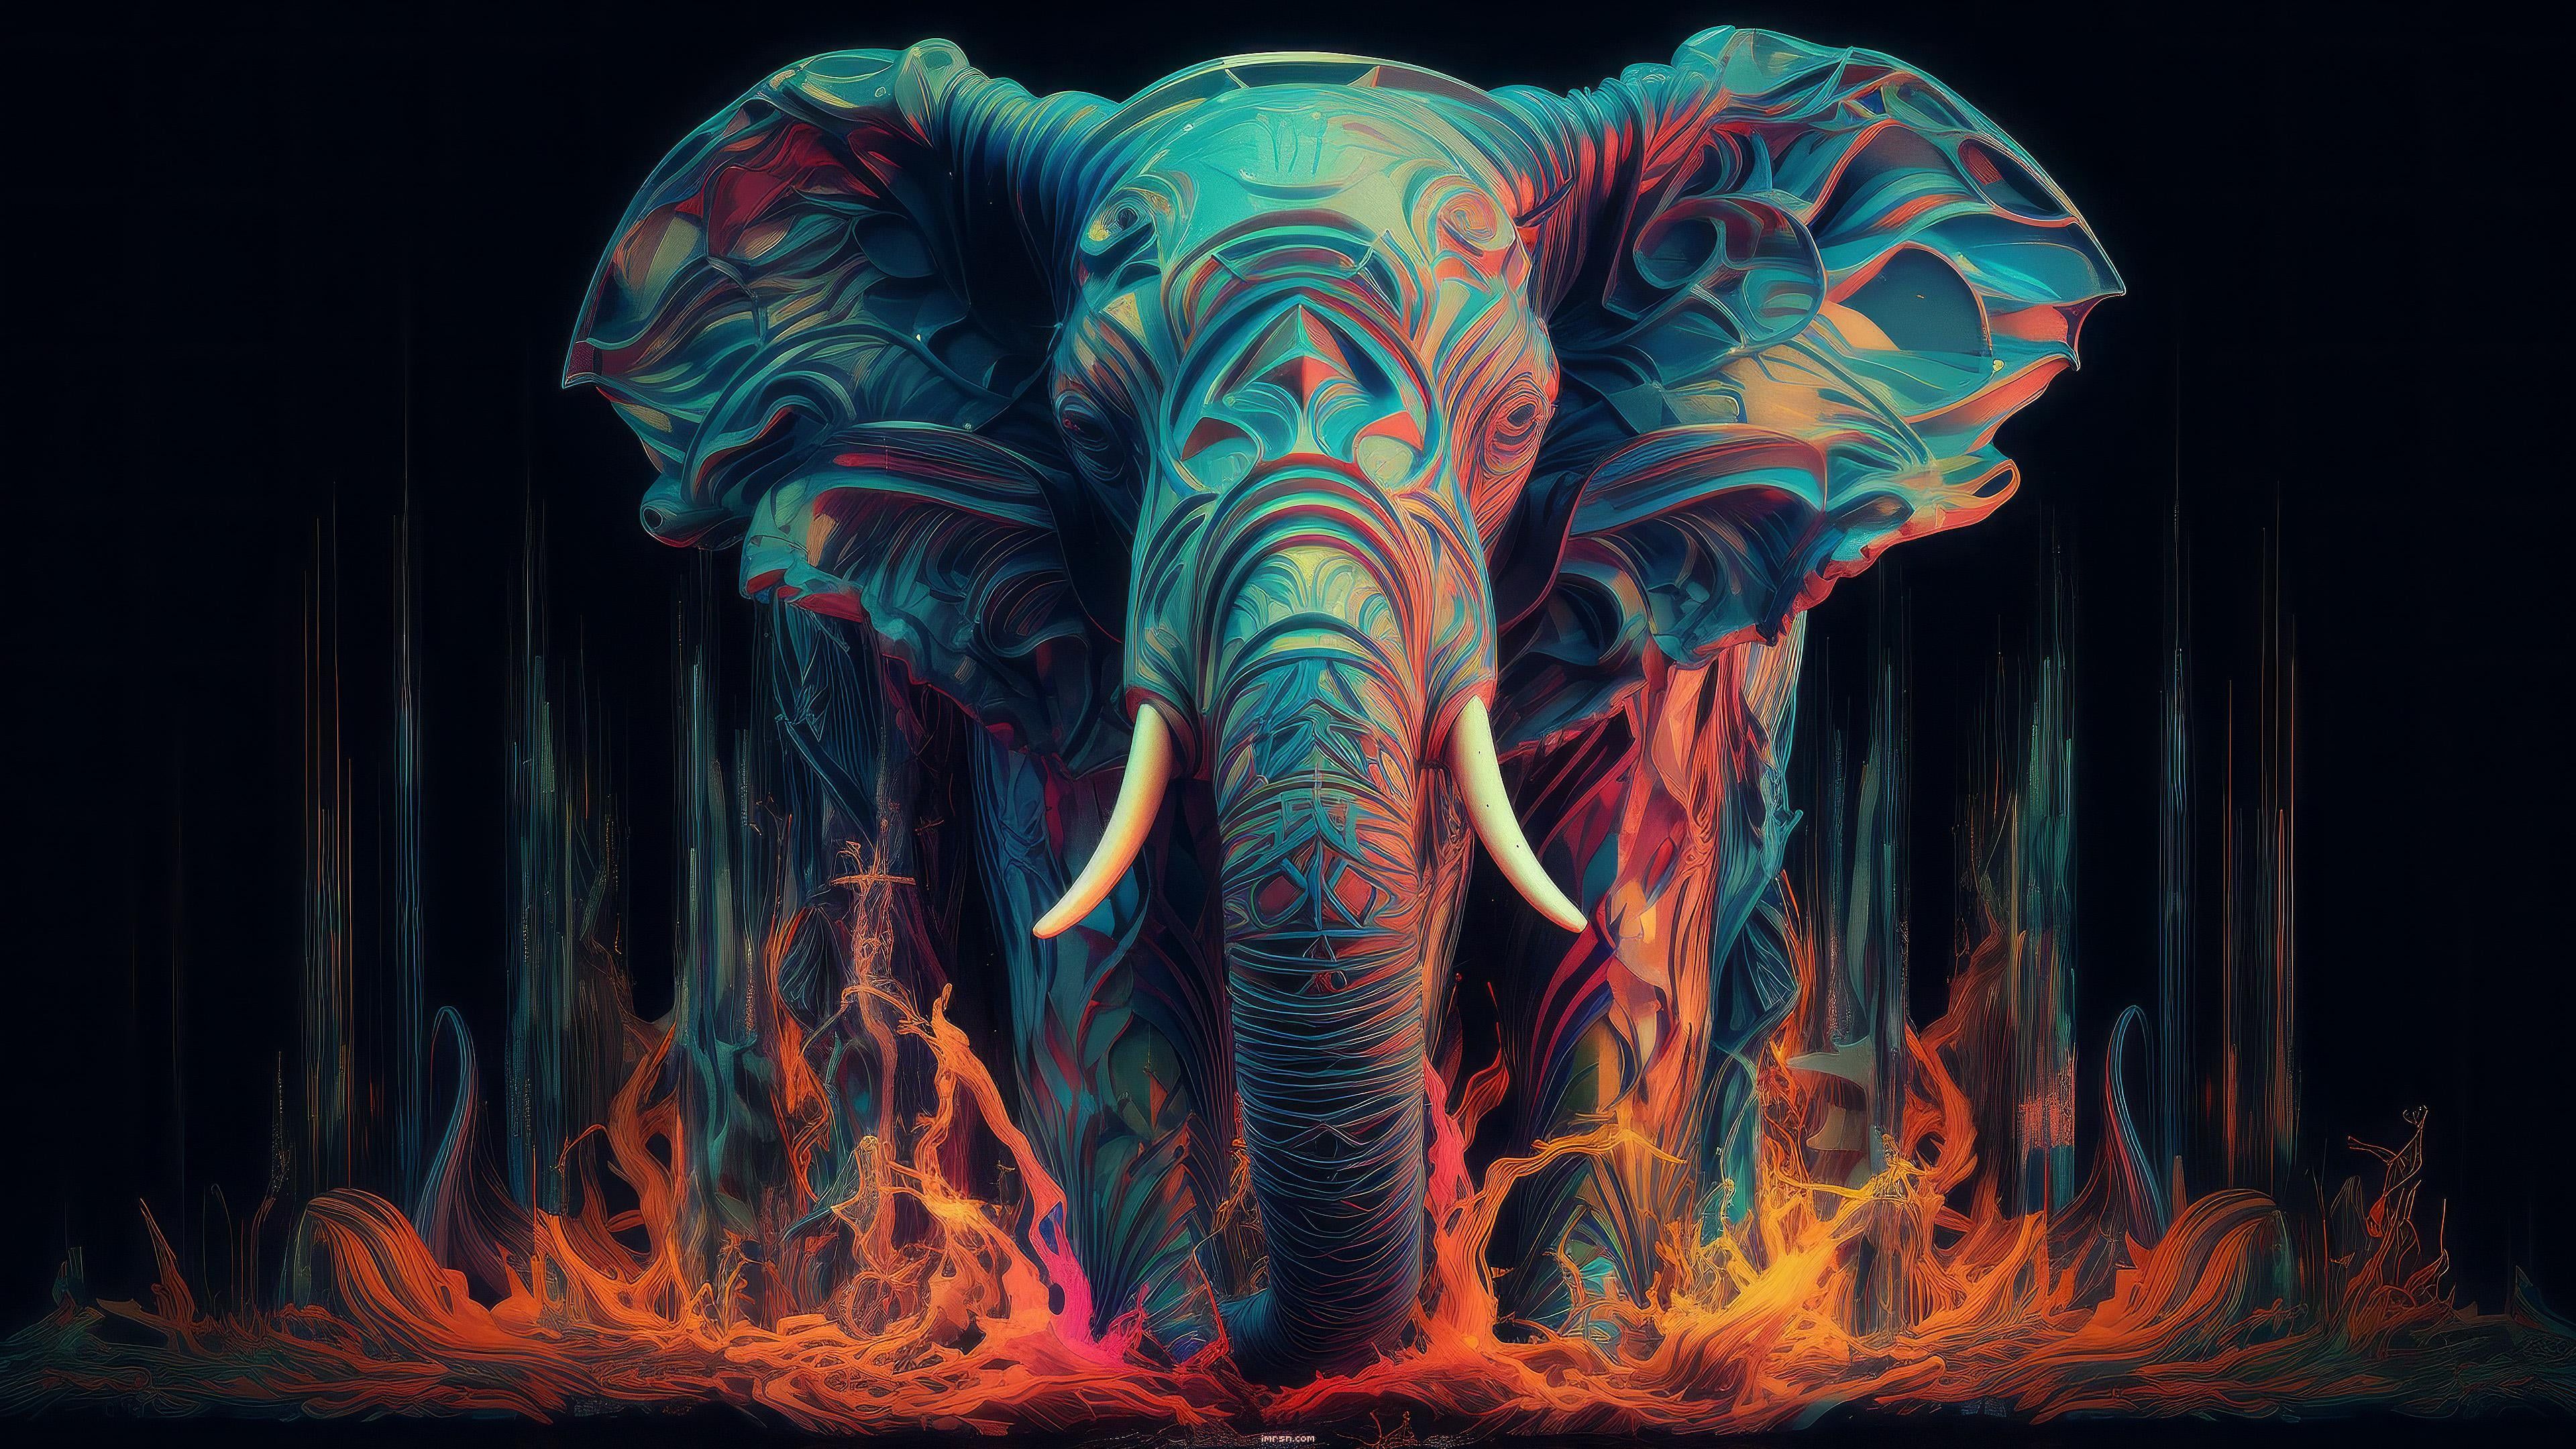 An elephant in a forest of fire - Elephant